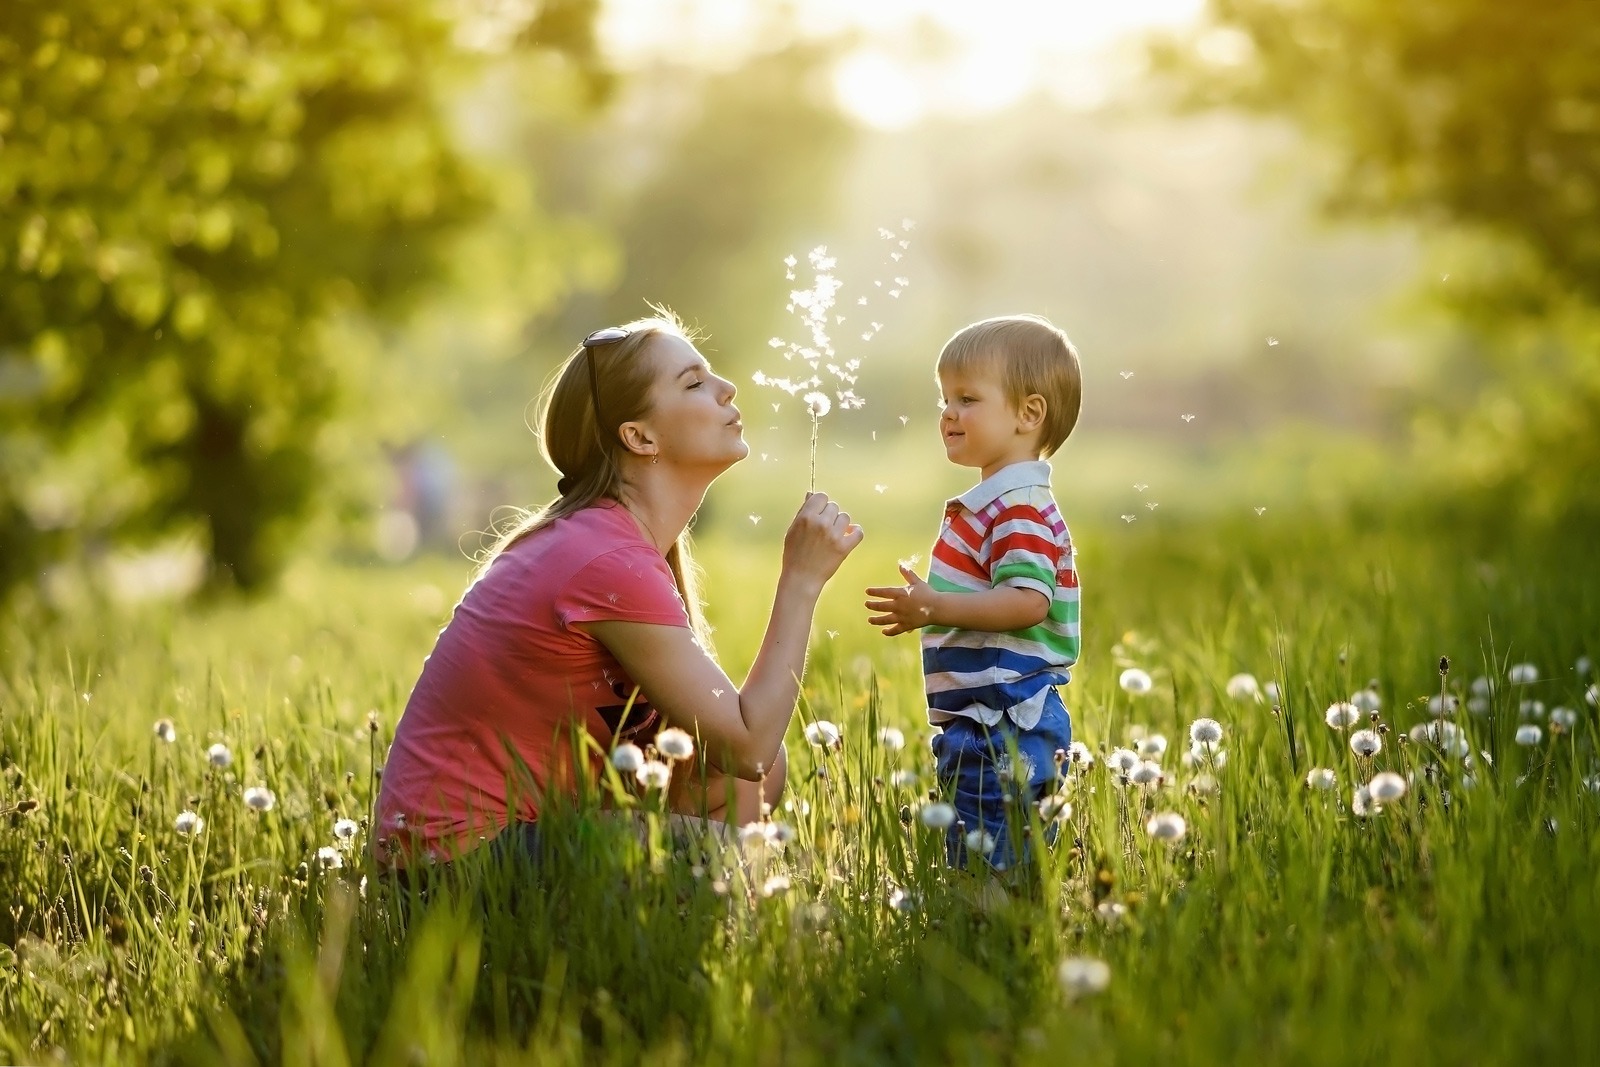 A mother blows a dandelion head with her baby son in the middle of a spring meadow.